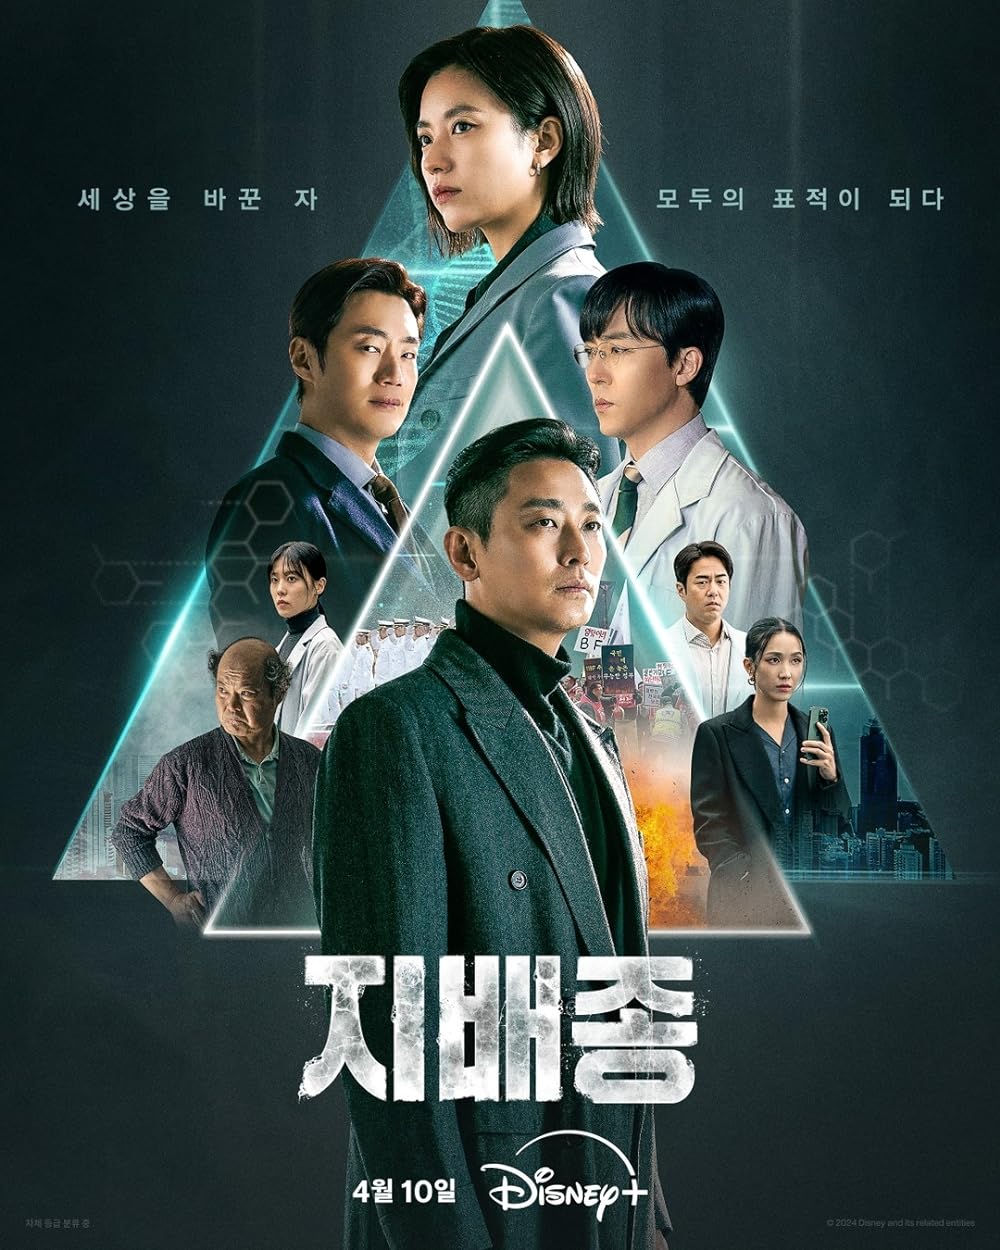 Blood Free (April 10, Disney+ Hotstar)Set in futuristic South Korea, 'Blood Free' explores the shadowy world of a biotech corporation revolutionizing the meat industry with artificially cultured meat. As tensions rise and suspicions loom, ex-soldier turned bodyguard Woo Chae-woon finds himself entangled in a web of corporate ambition and secrecy, navigating treacherous waters to uncover the truth.